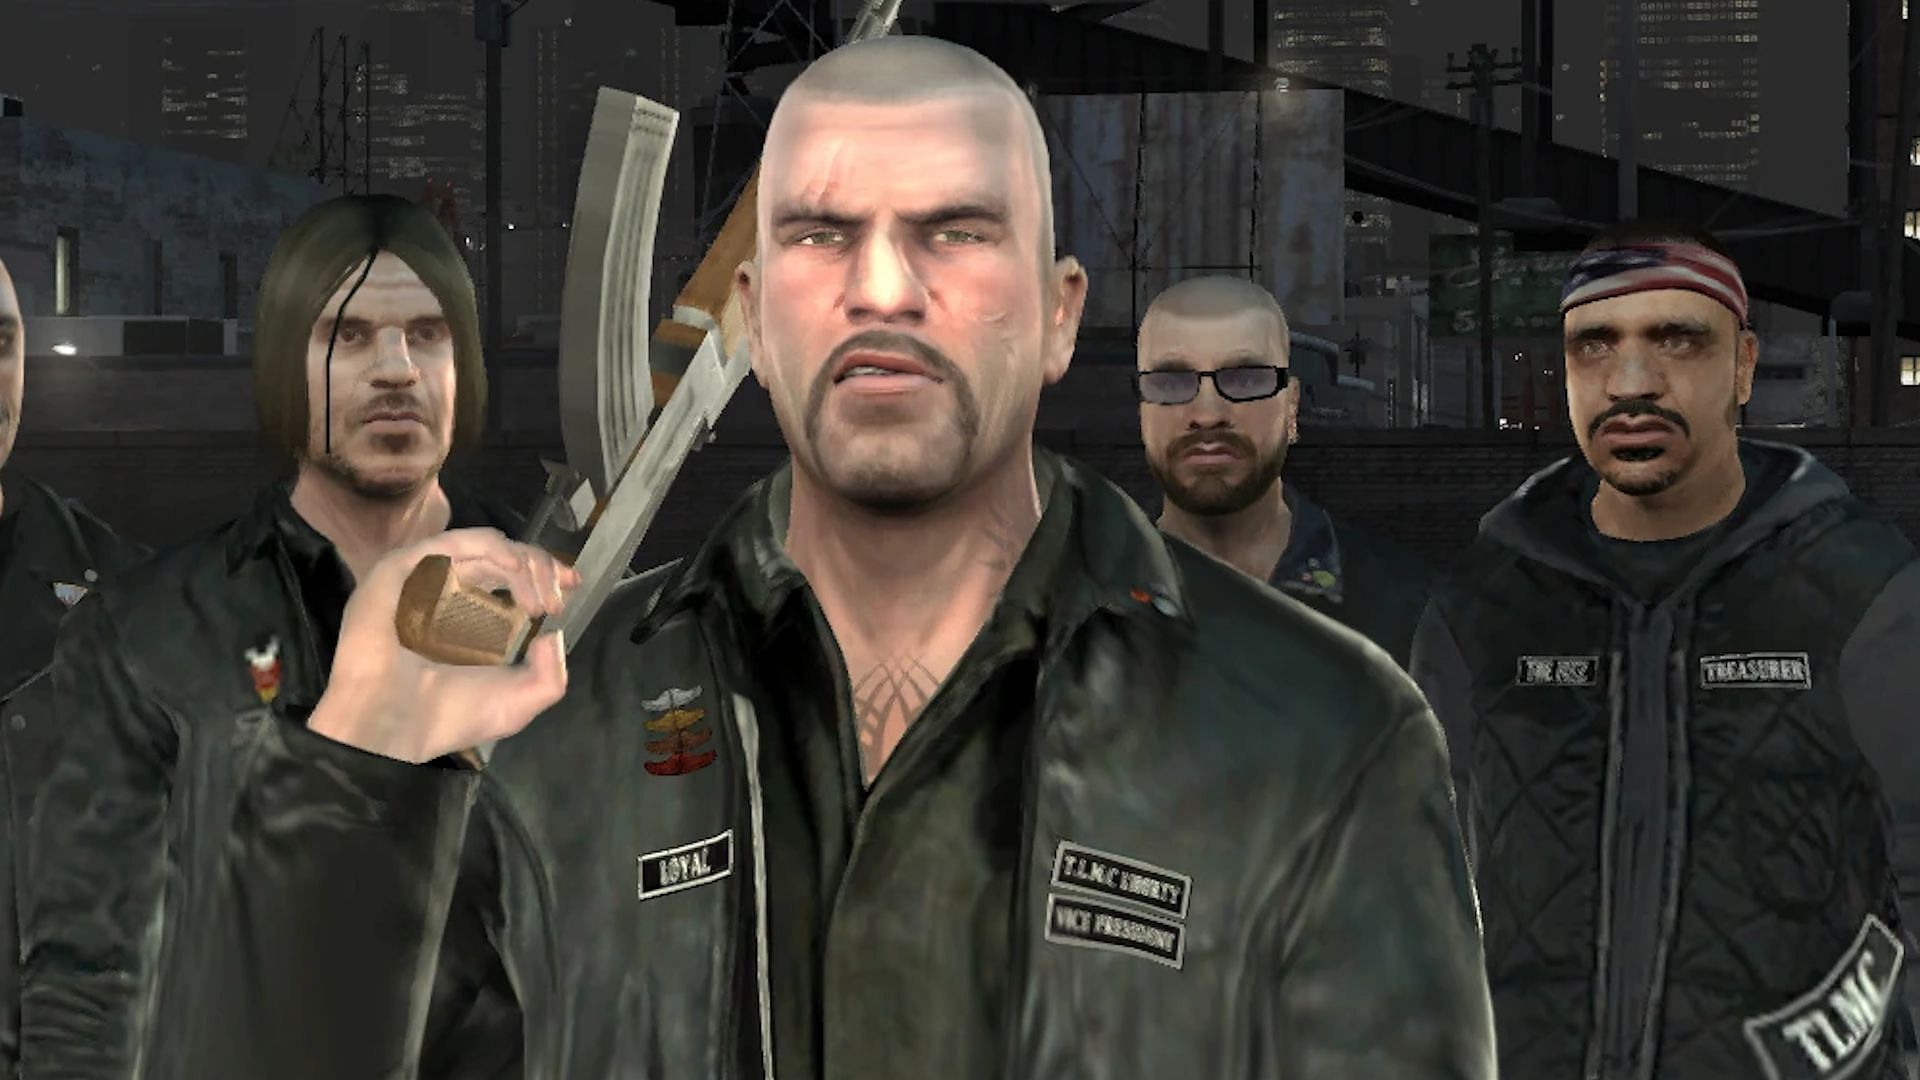 Johnny Klebitz has appeared in several games, ranging from being a bonafide tough guy to a dead person